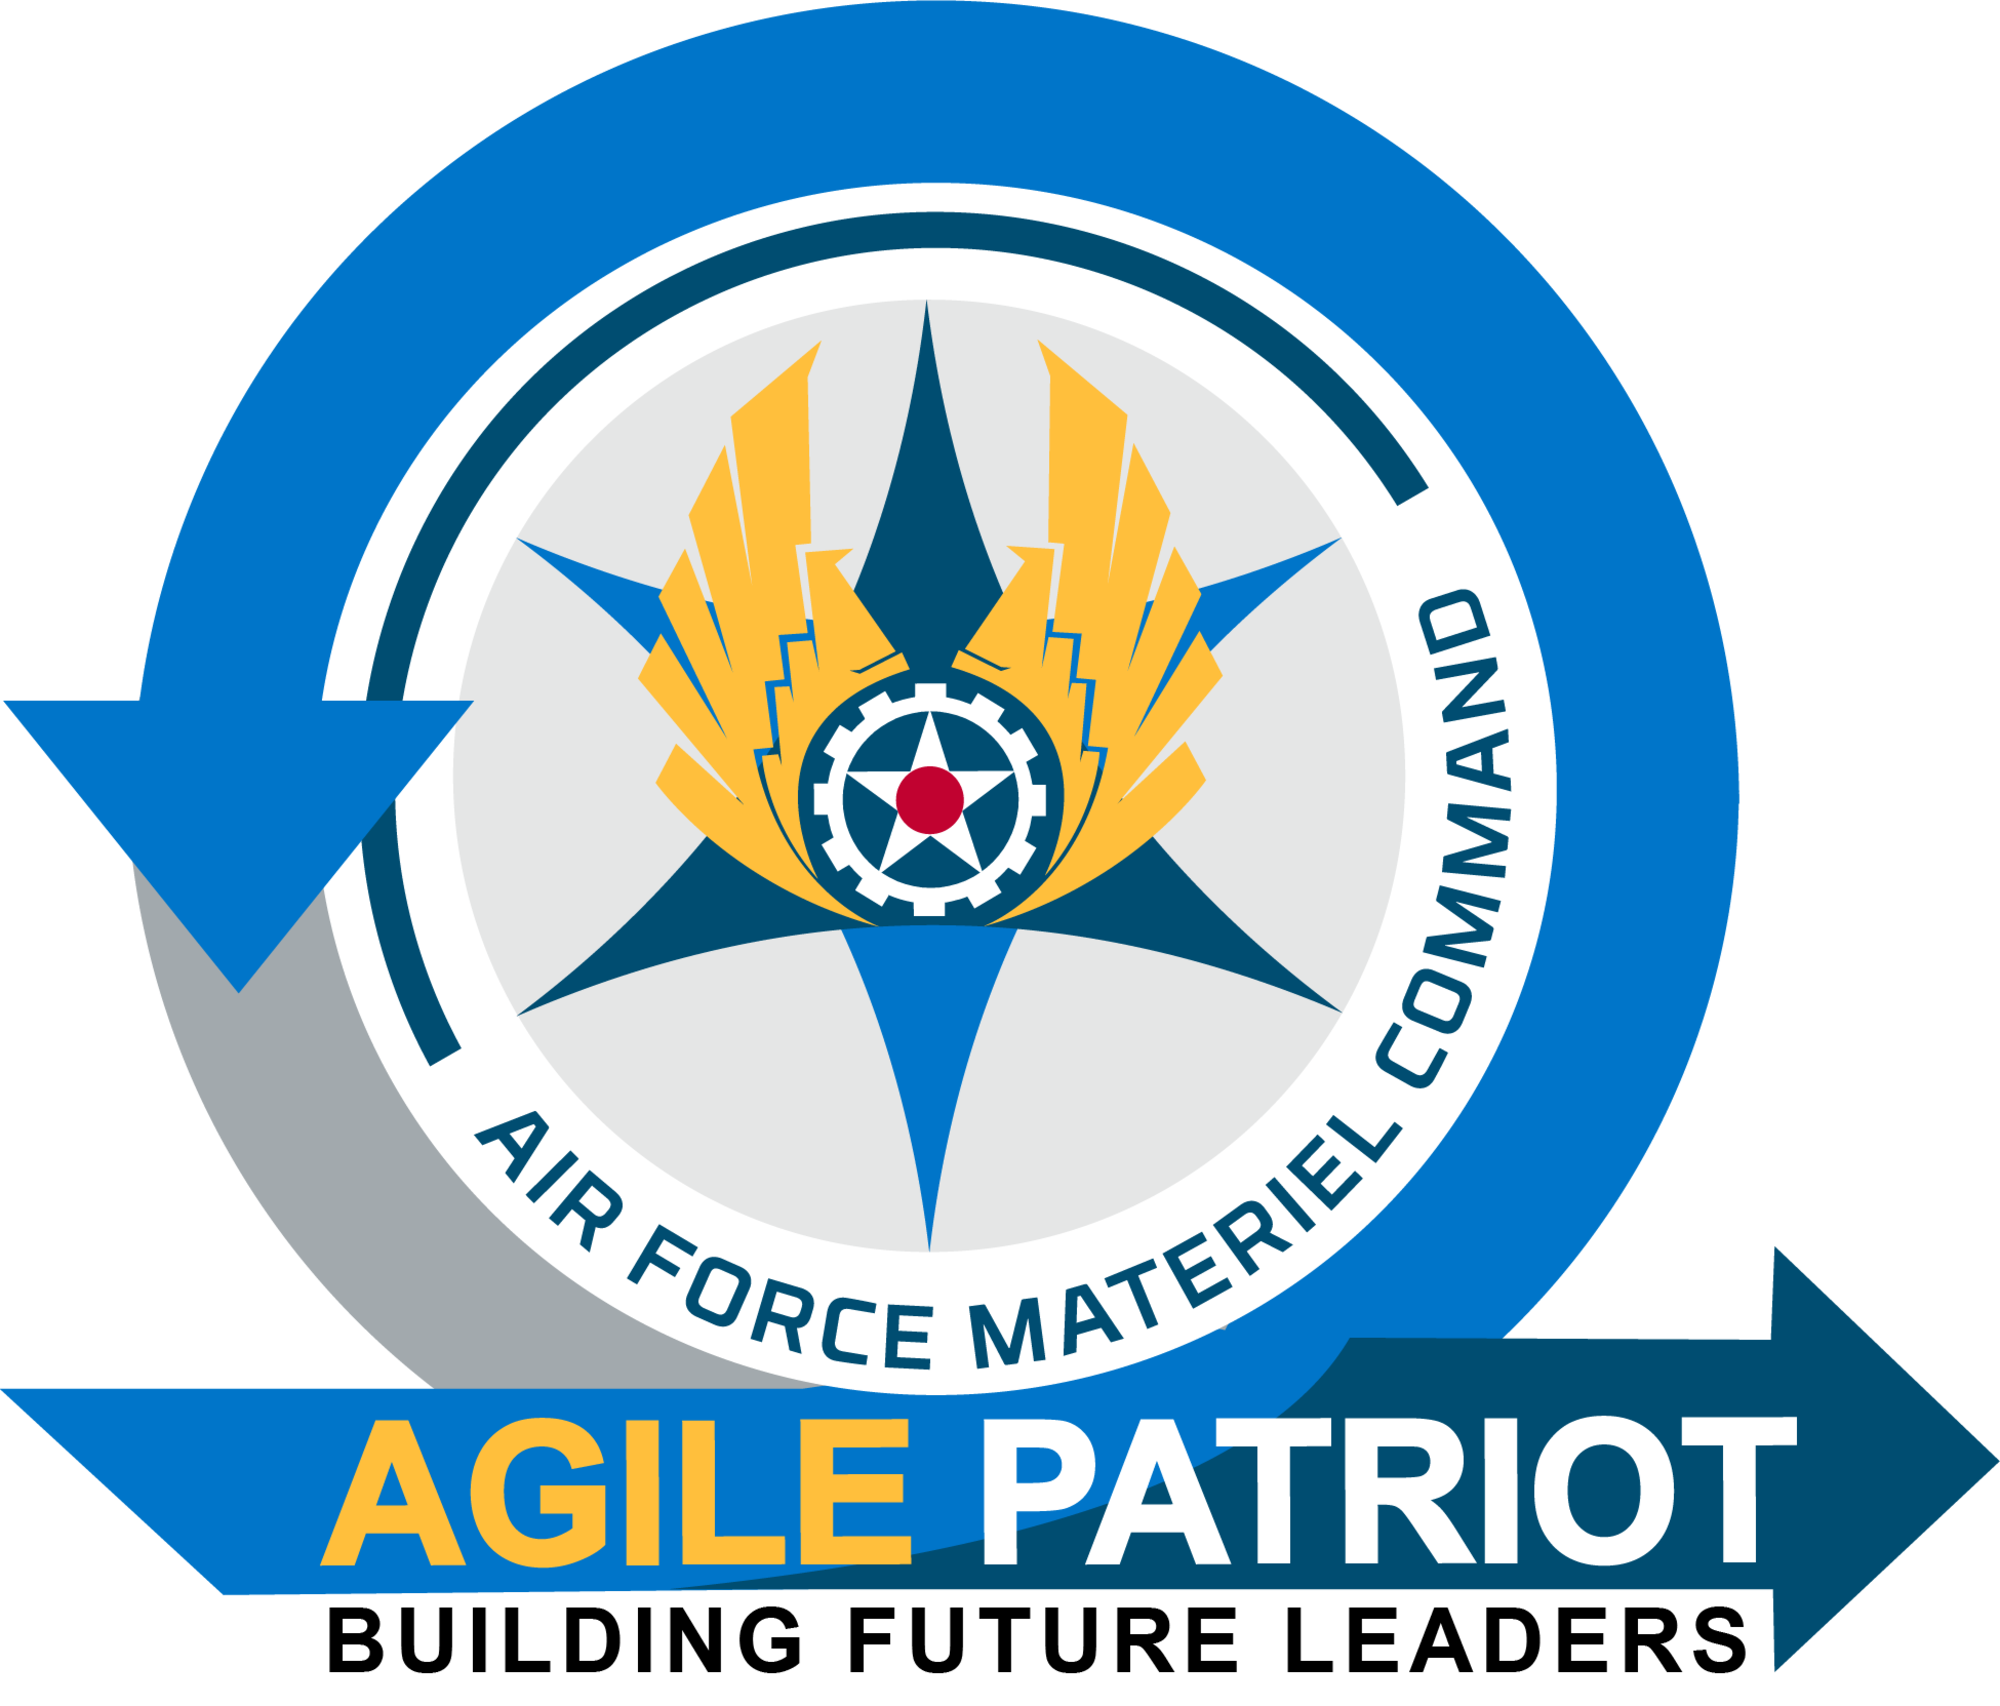 Air Force Materiel Command held its 2021 Agile Patriot professional development conference, Jan. 10-13, providing both mid-tier military and civilian Airmen with the tools and training to be successful leaders in the future.